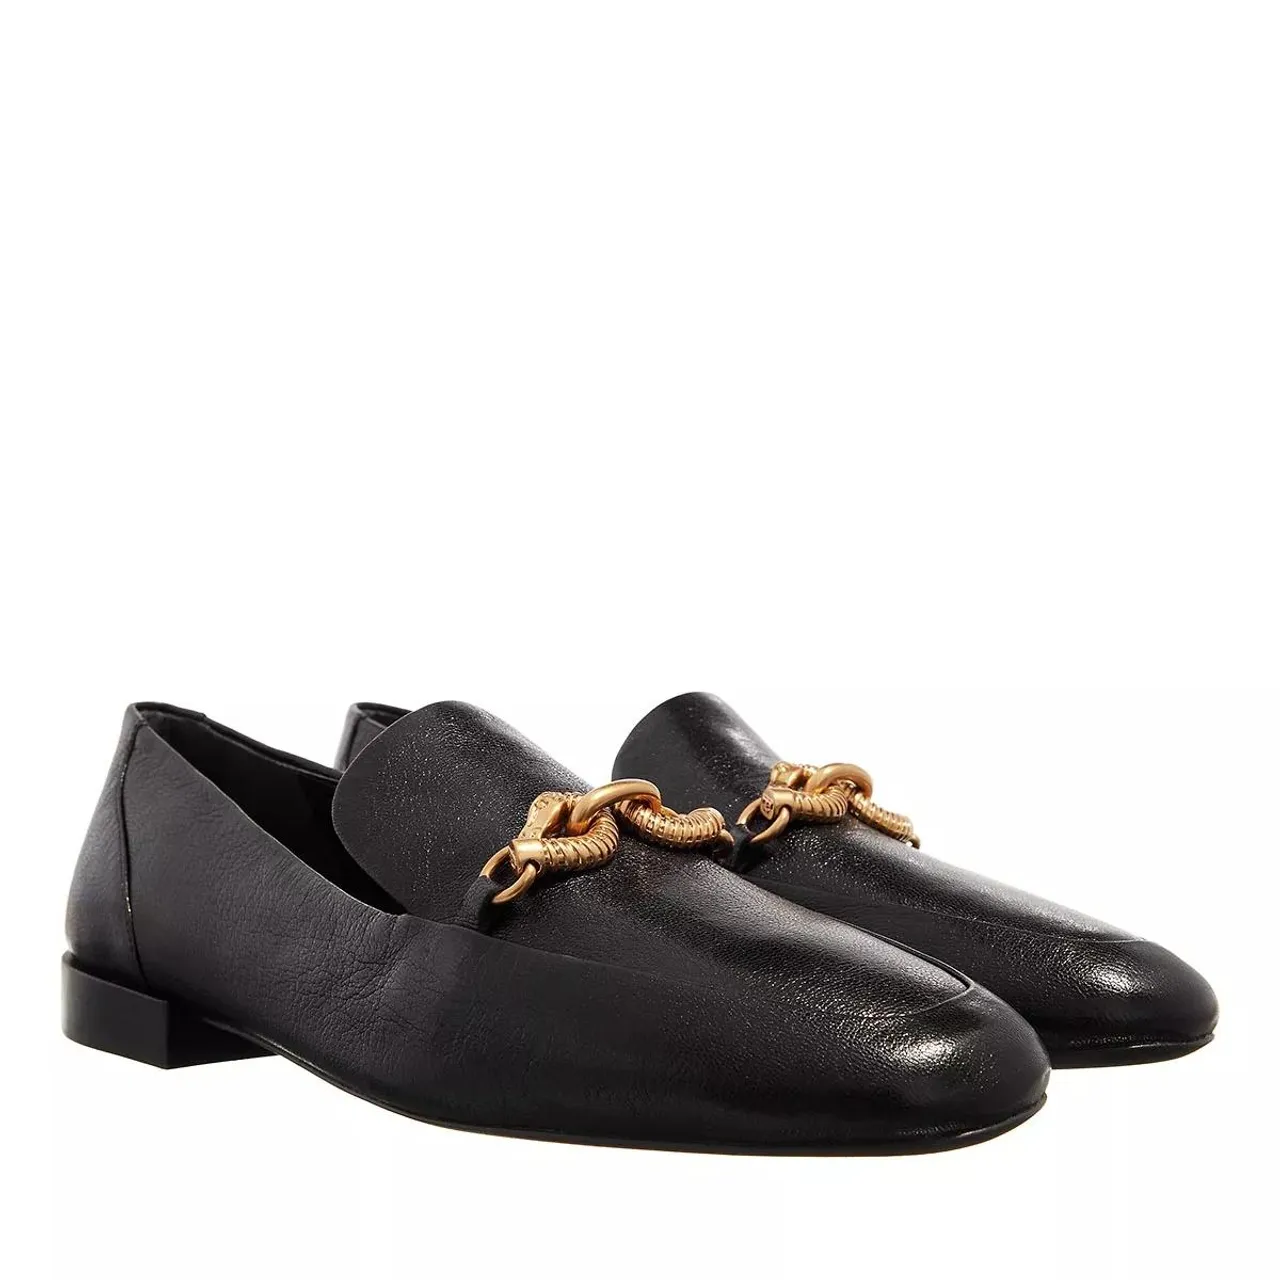 Tory Burch Loafers & Ballerinas - Jessa Classic Loafer